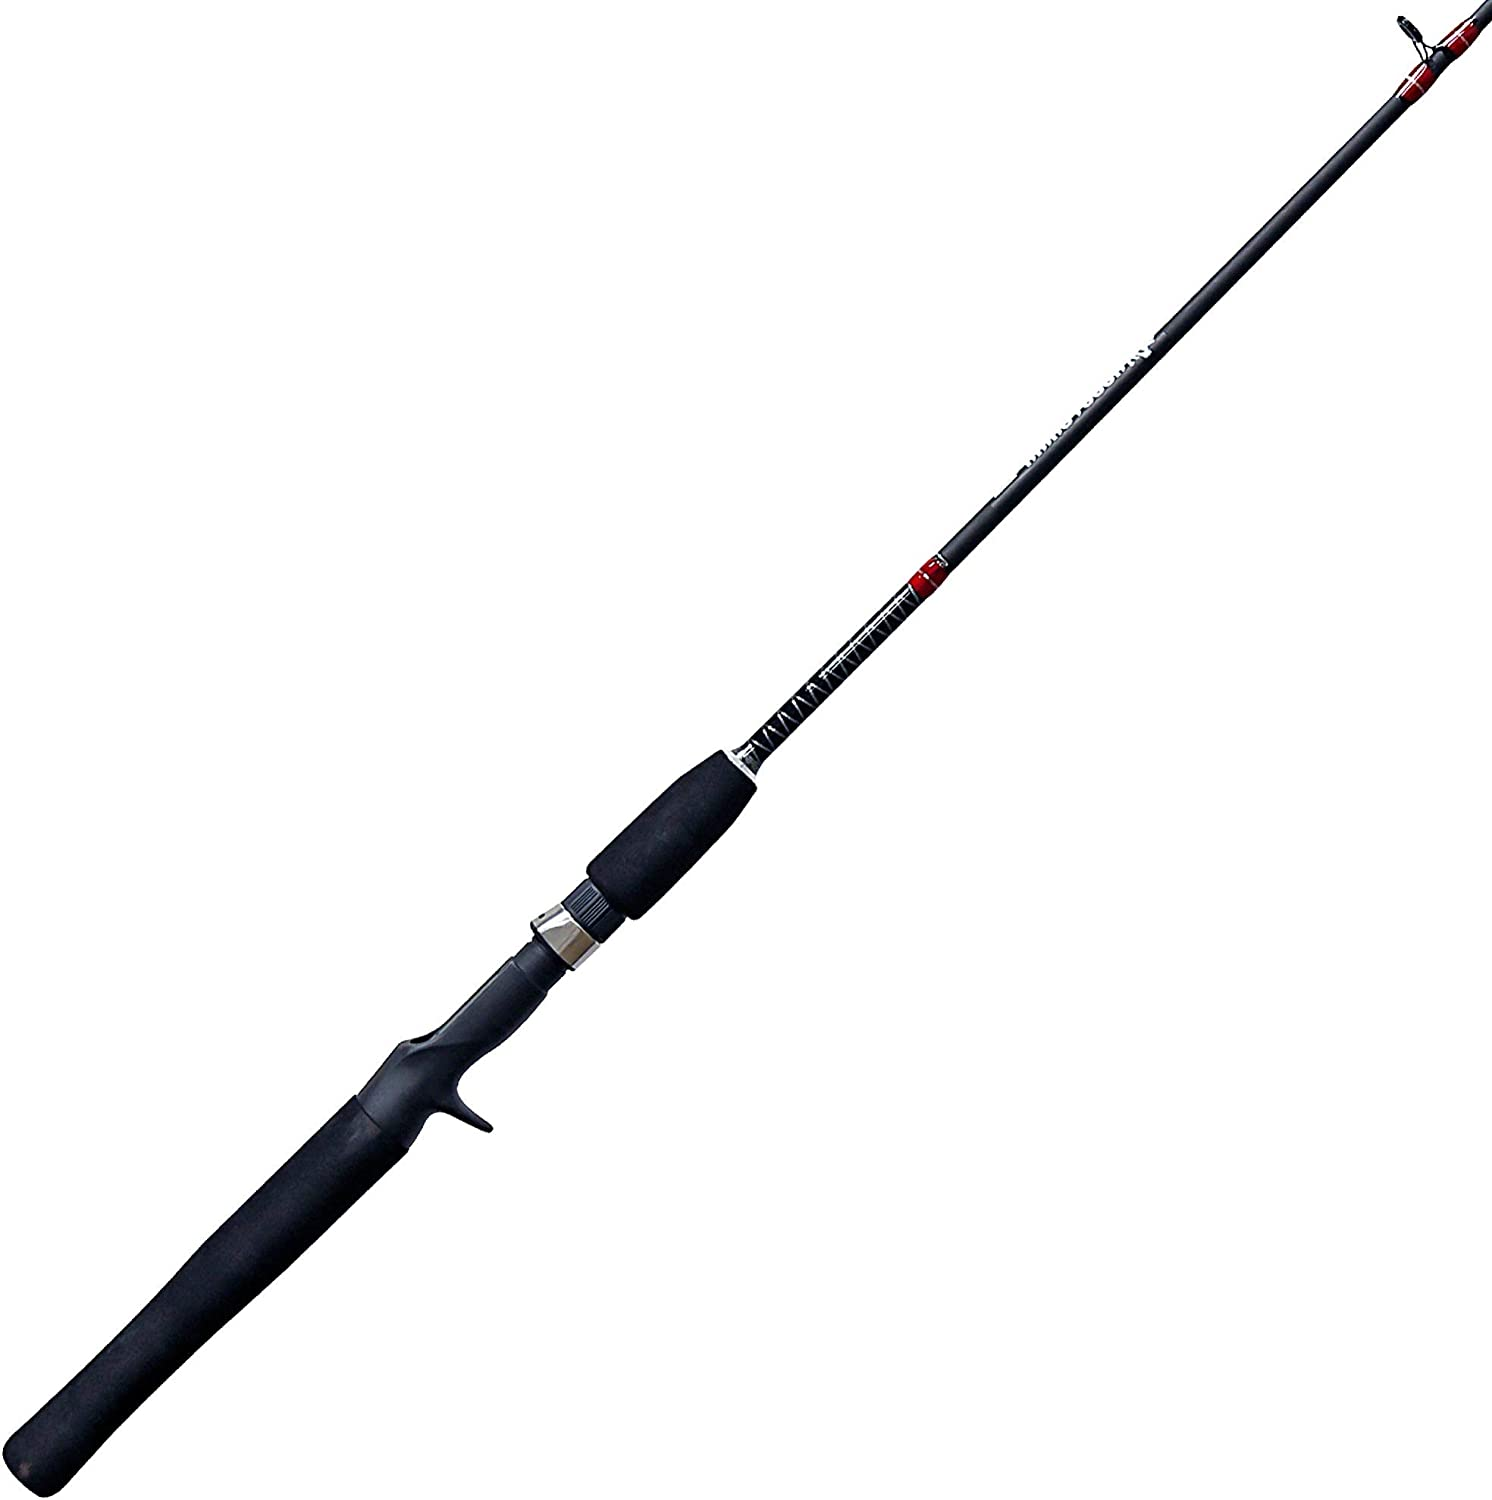 Zebco Rhino Tough Glowtip Casting Fishing Rod - Best Fishing Rod For Closed Face Reel